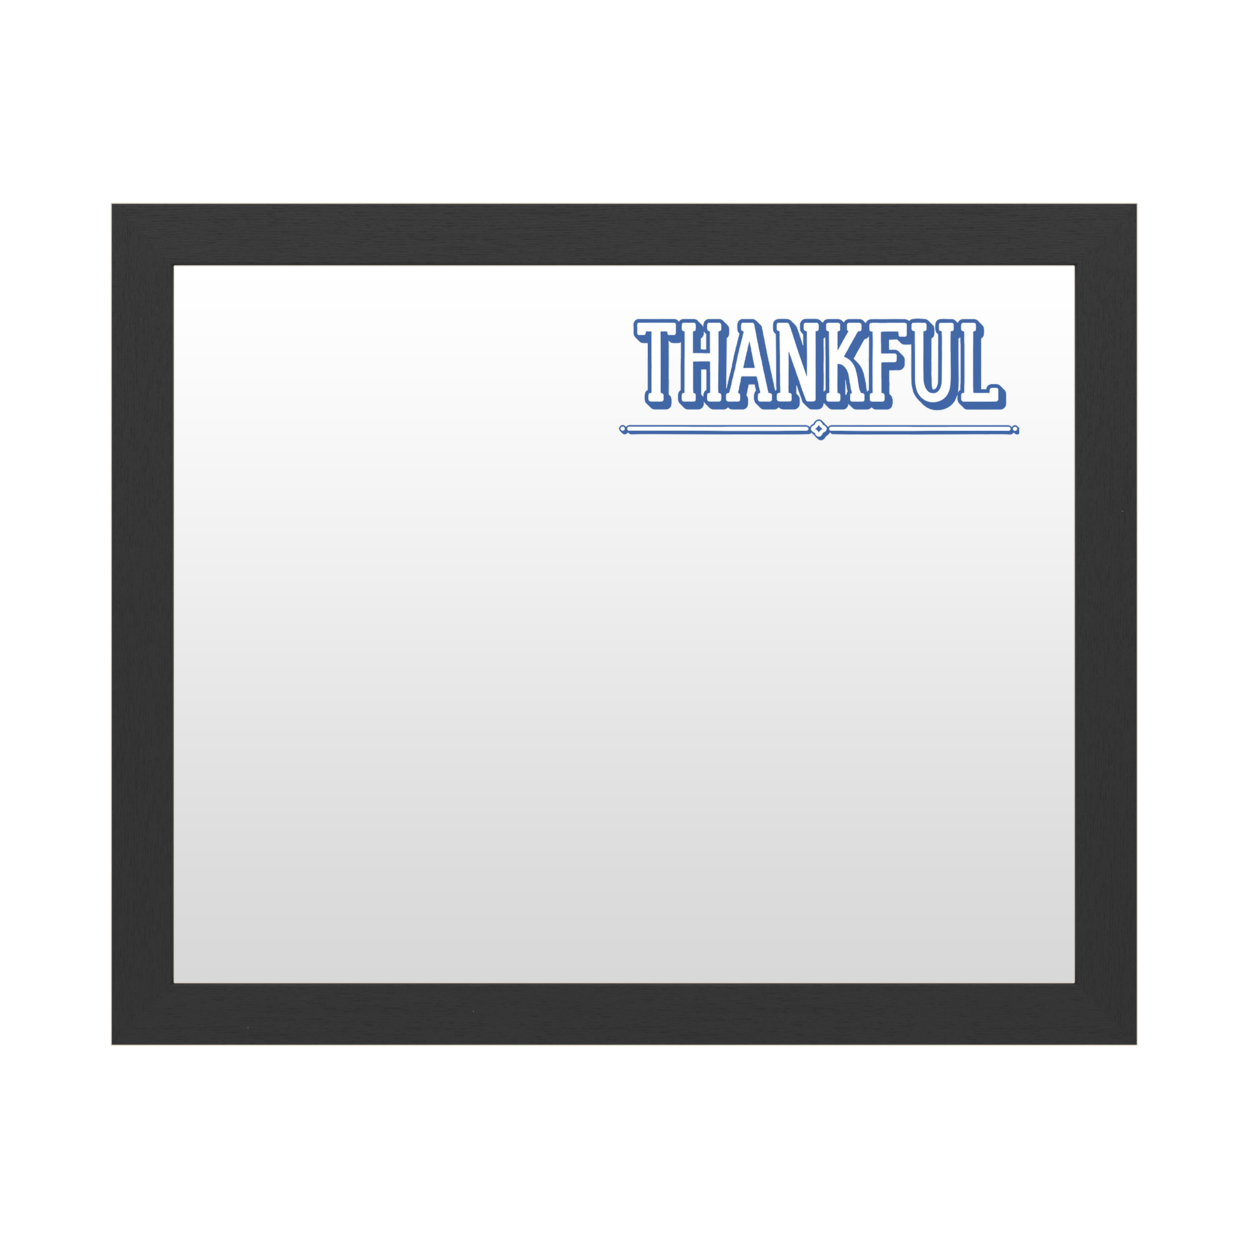 Dry Erase 16 X 20 Marker Board With Printed Artwork - Thankful Blue White Board - Ready To Hang